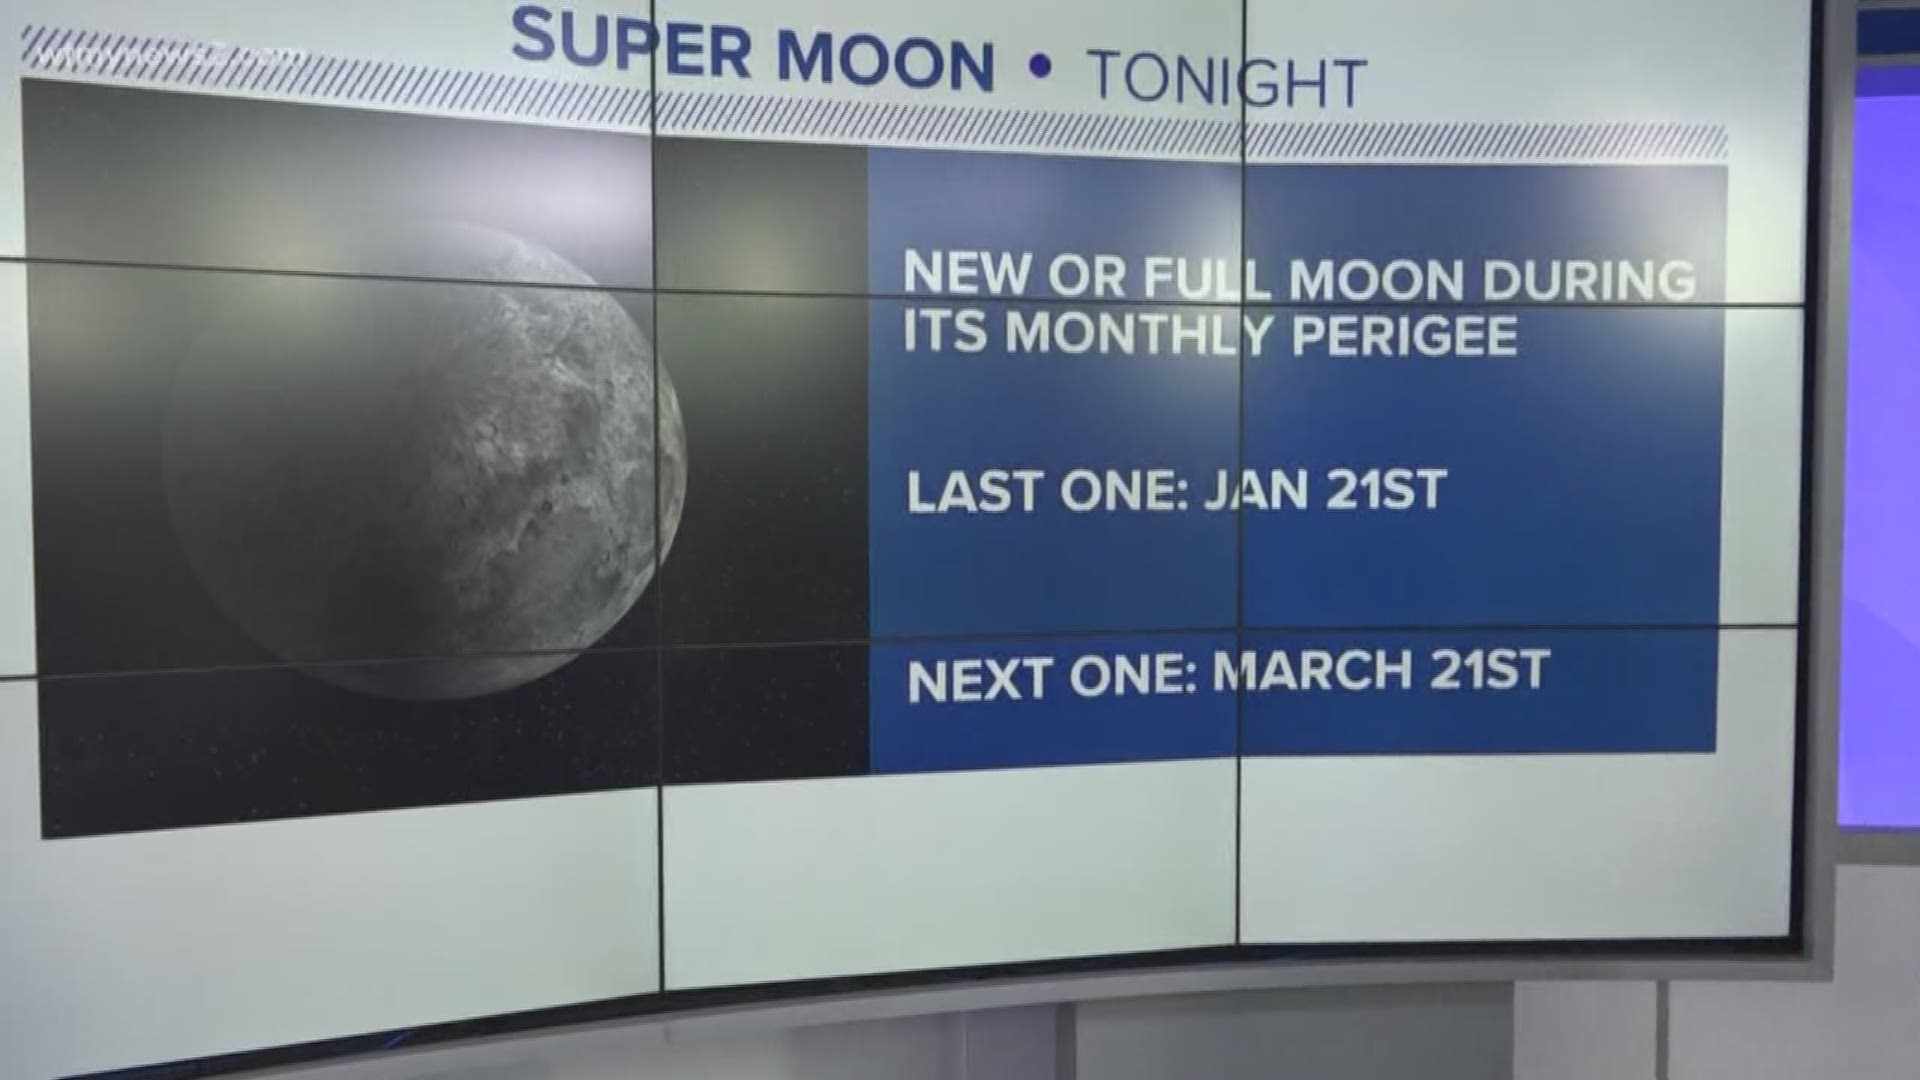 The next full moon will be the biggest and brightest of the year.